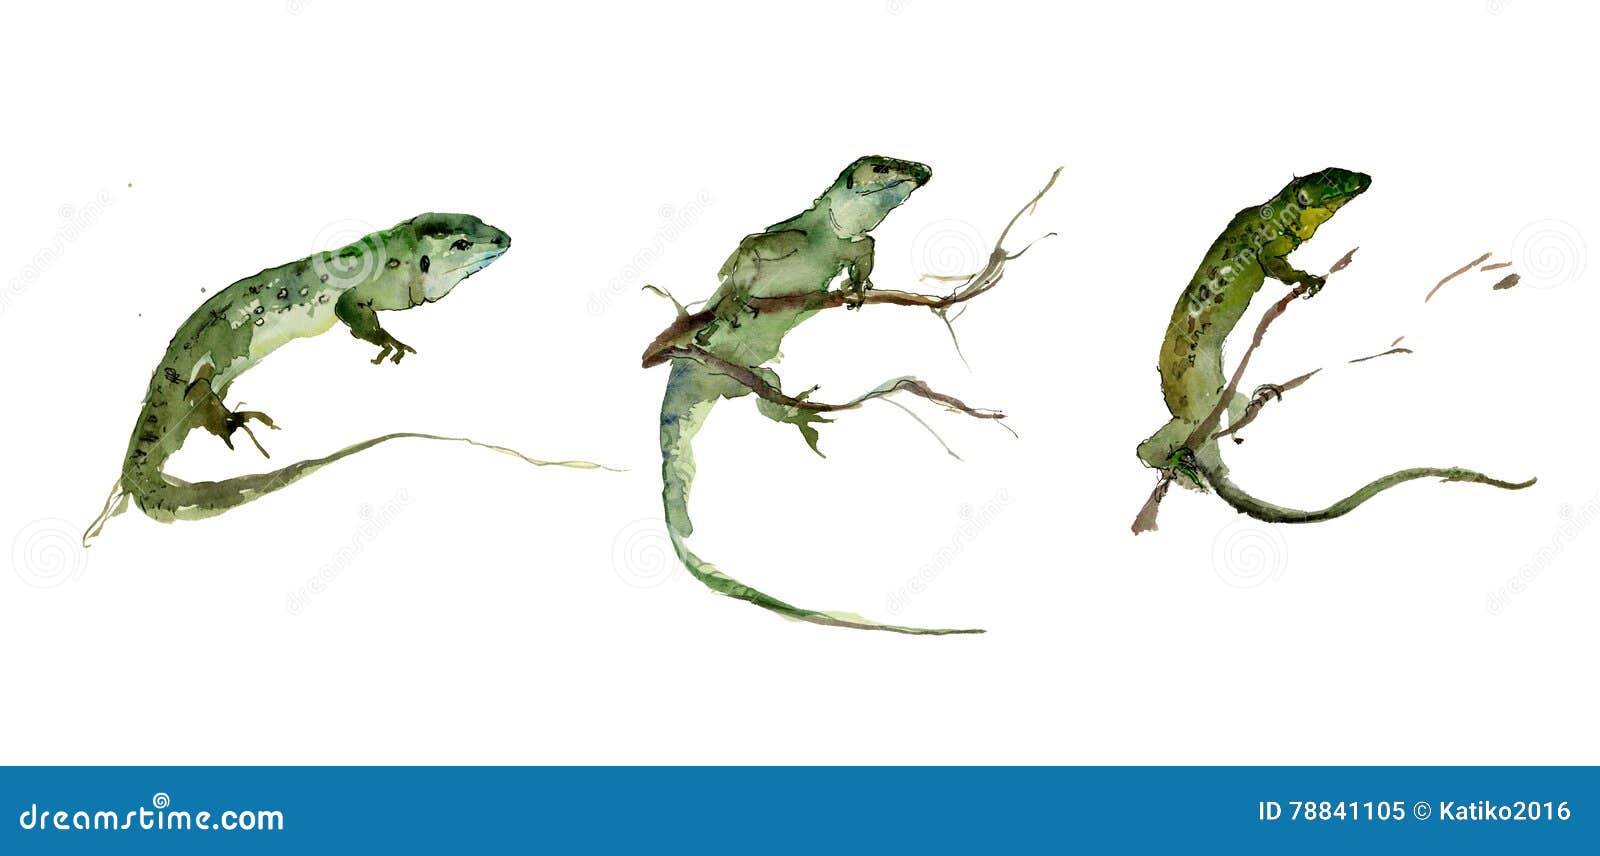 set of green lizards on the white background. watercolor painting.